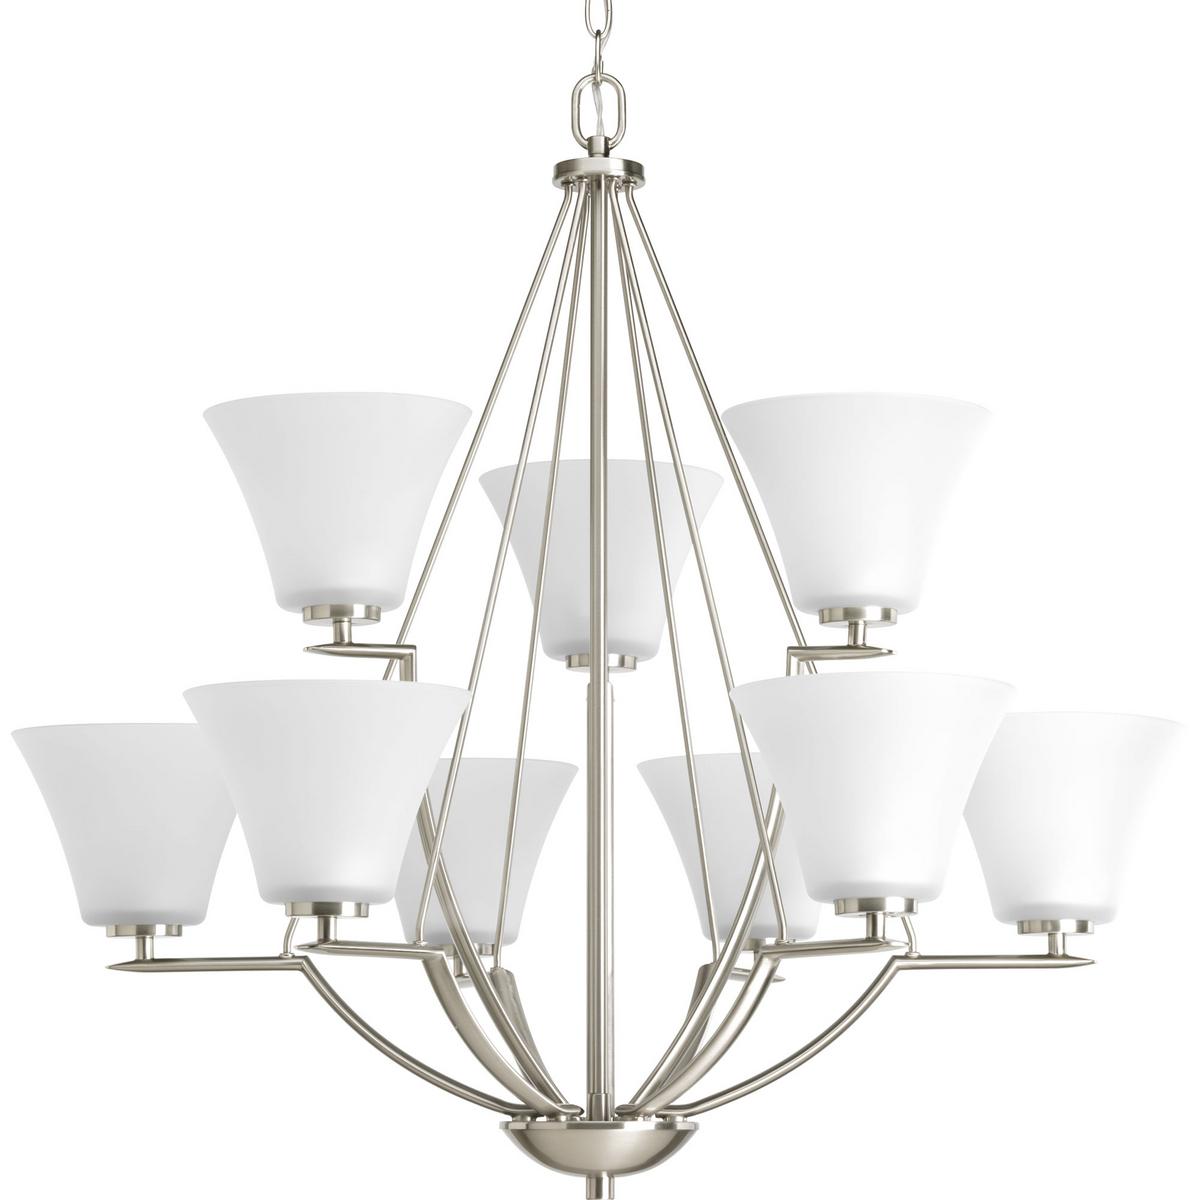 Hubbell P4625-09 Nine-light chandelier with white etched glass from the Bravo collection. Linear elements stream throughout the fixture to compose a relaxed but exotic ambiance. Generously scaled glass shades add distinction against the Brushed Nickel finish and provide p